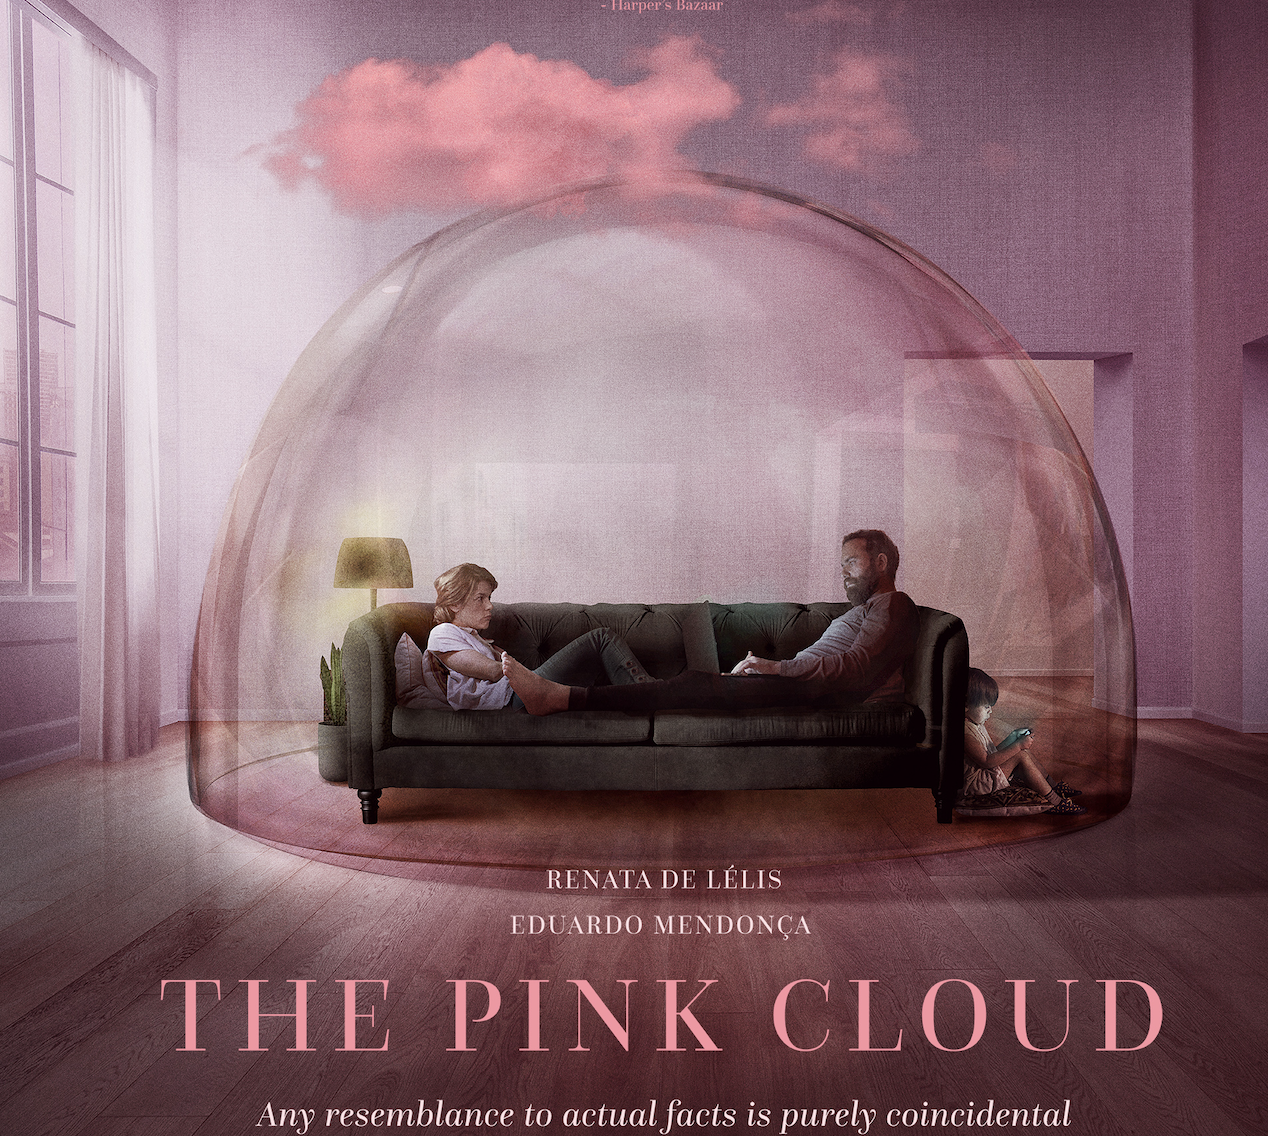 Check Out The New Theatrical Trailer For The Pink Cloud